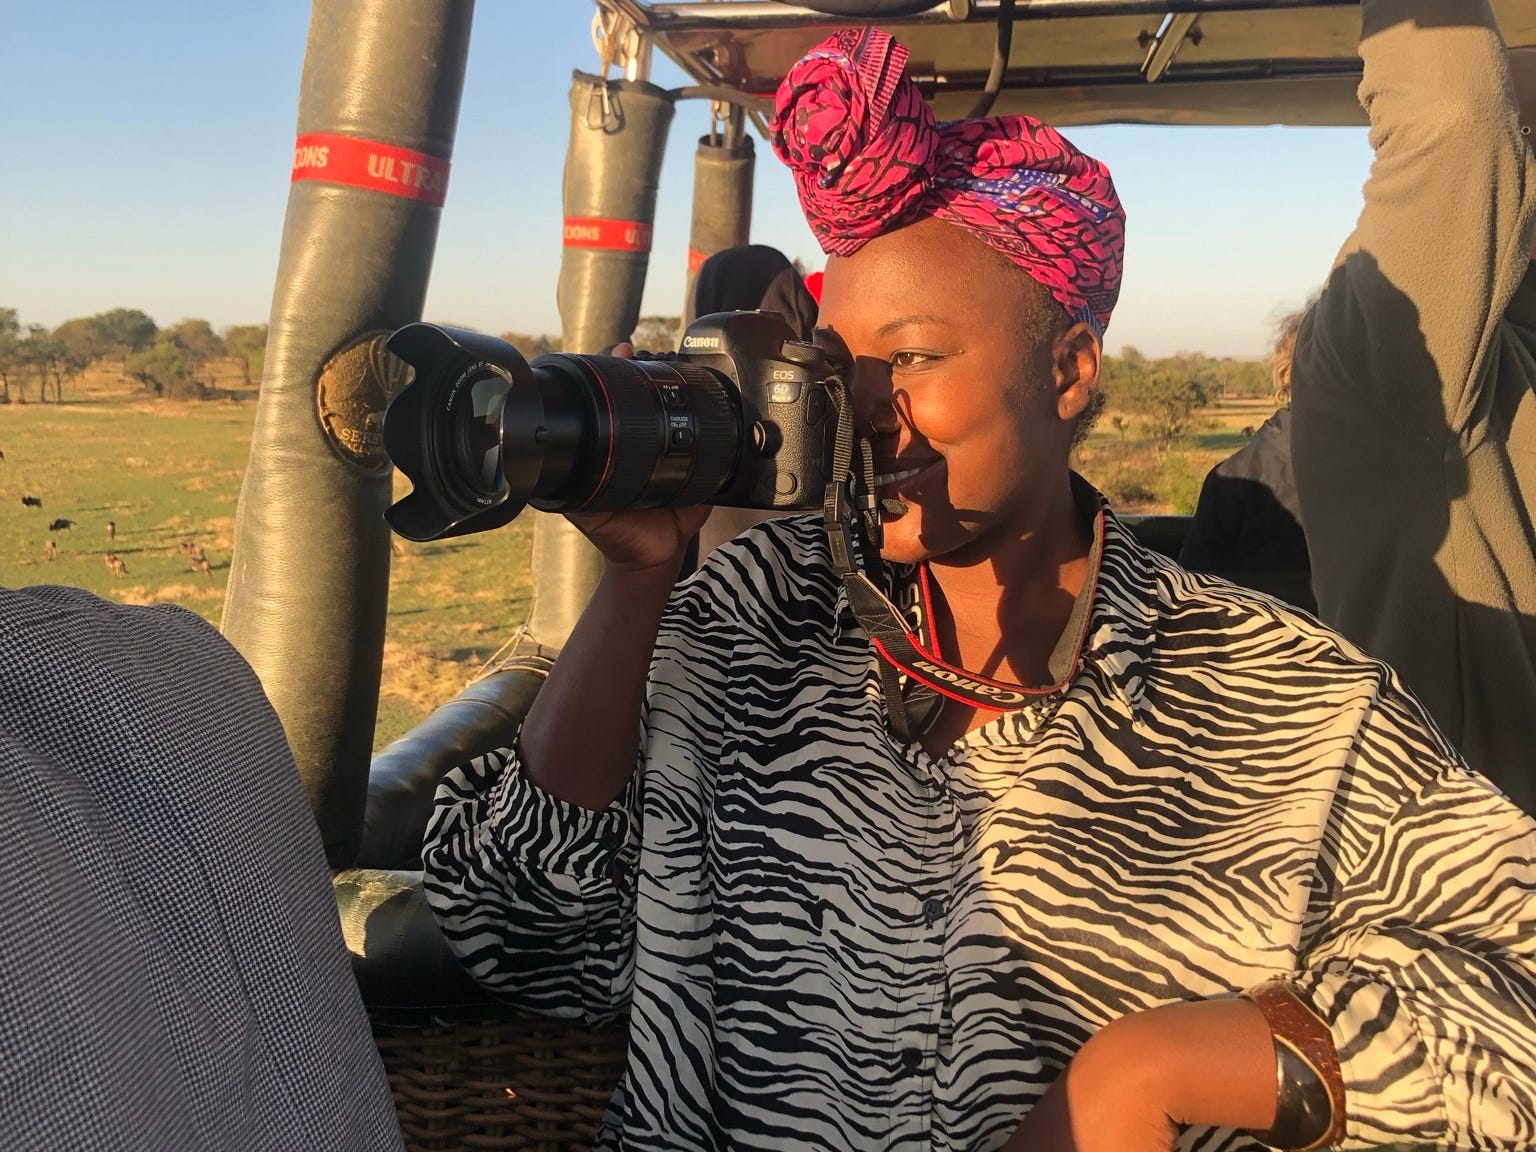 A woman wearing a zebra print shirt on an open jeep looking into a camera.